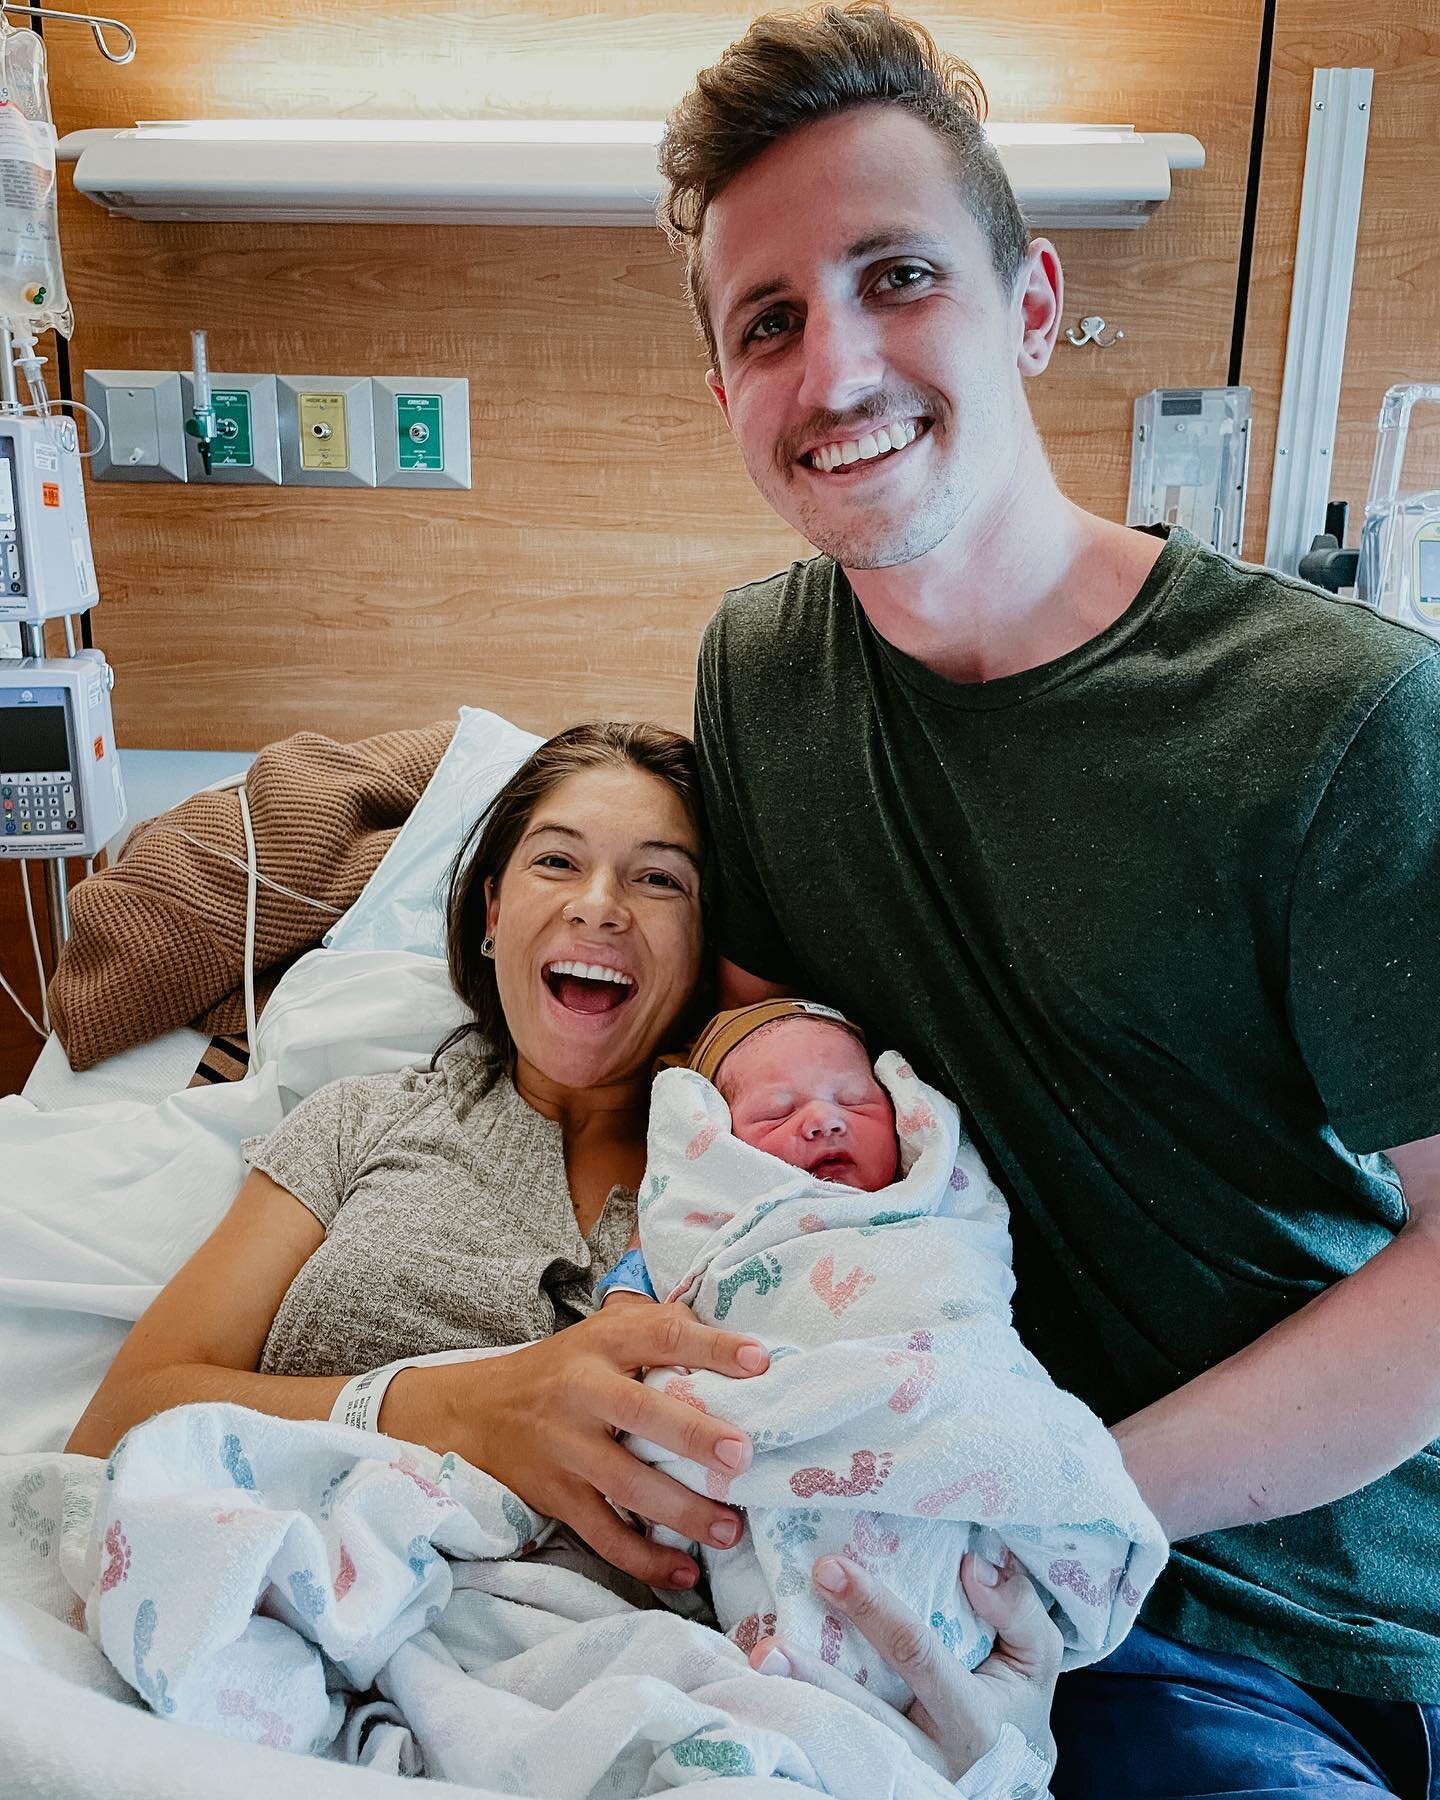 As of 8:57am this morning we are officially PARENTS! 

Cohen Shepherd Philgreen 💪🏼 8 lbs and 20.5&rdquo;

He&rsquo;s perfectly healthy. So overjoyed to be a family of 3. 

Dani was a CHAMP!  Labored and delivered all naturale. She was/is SO strong 